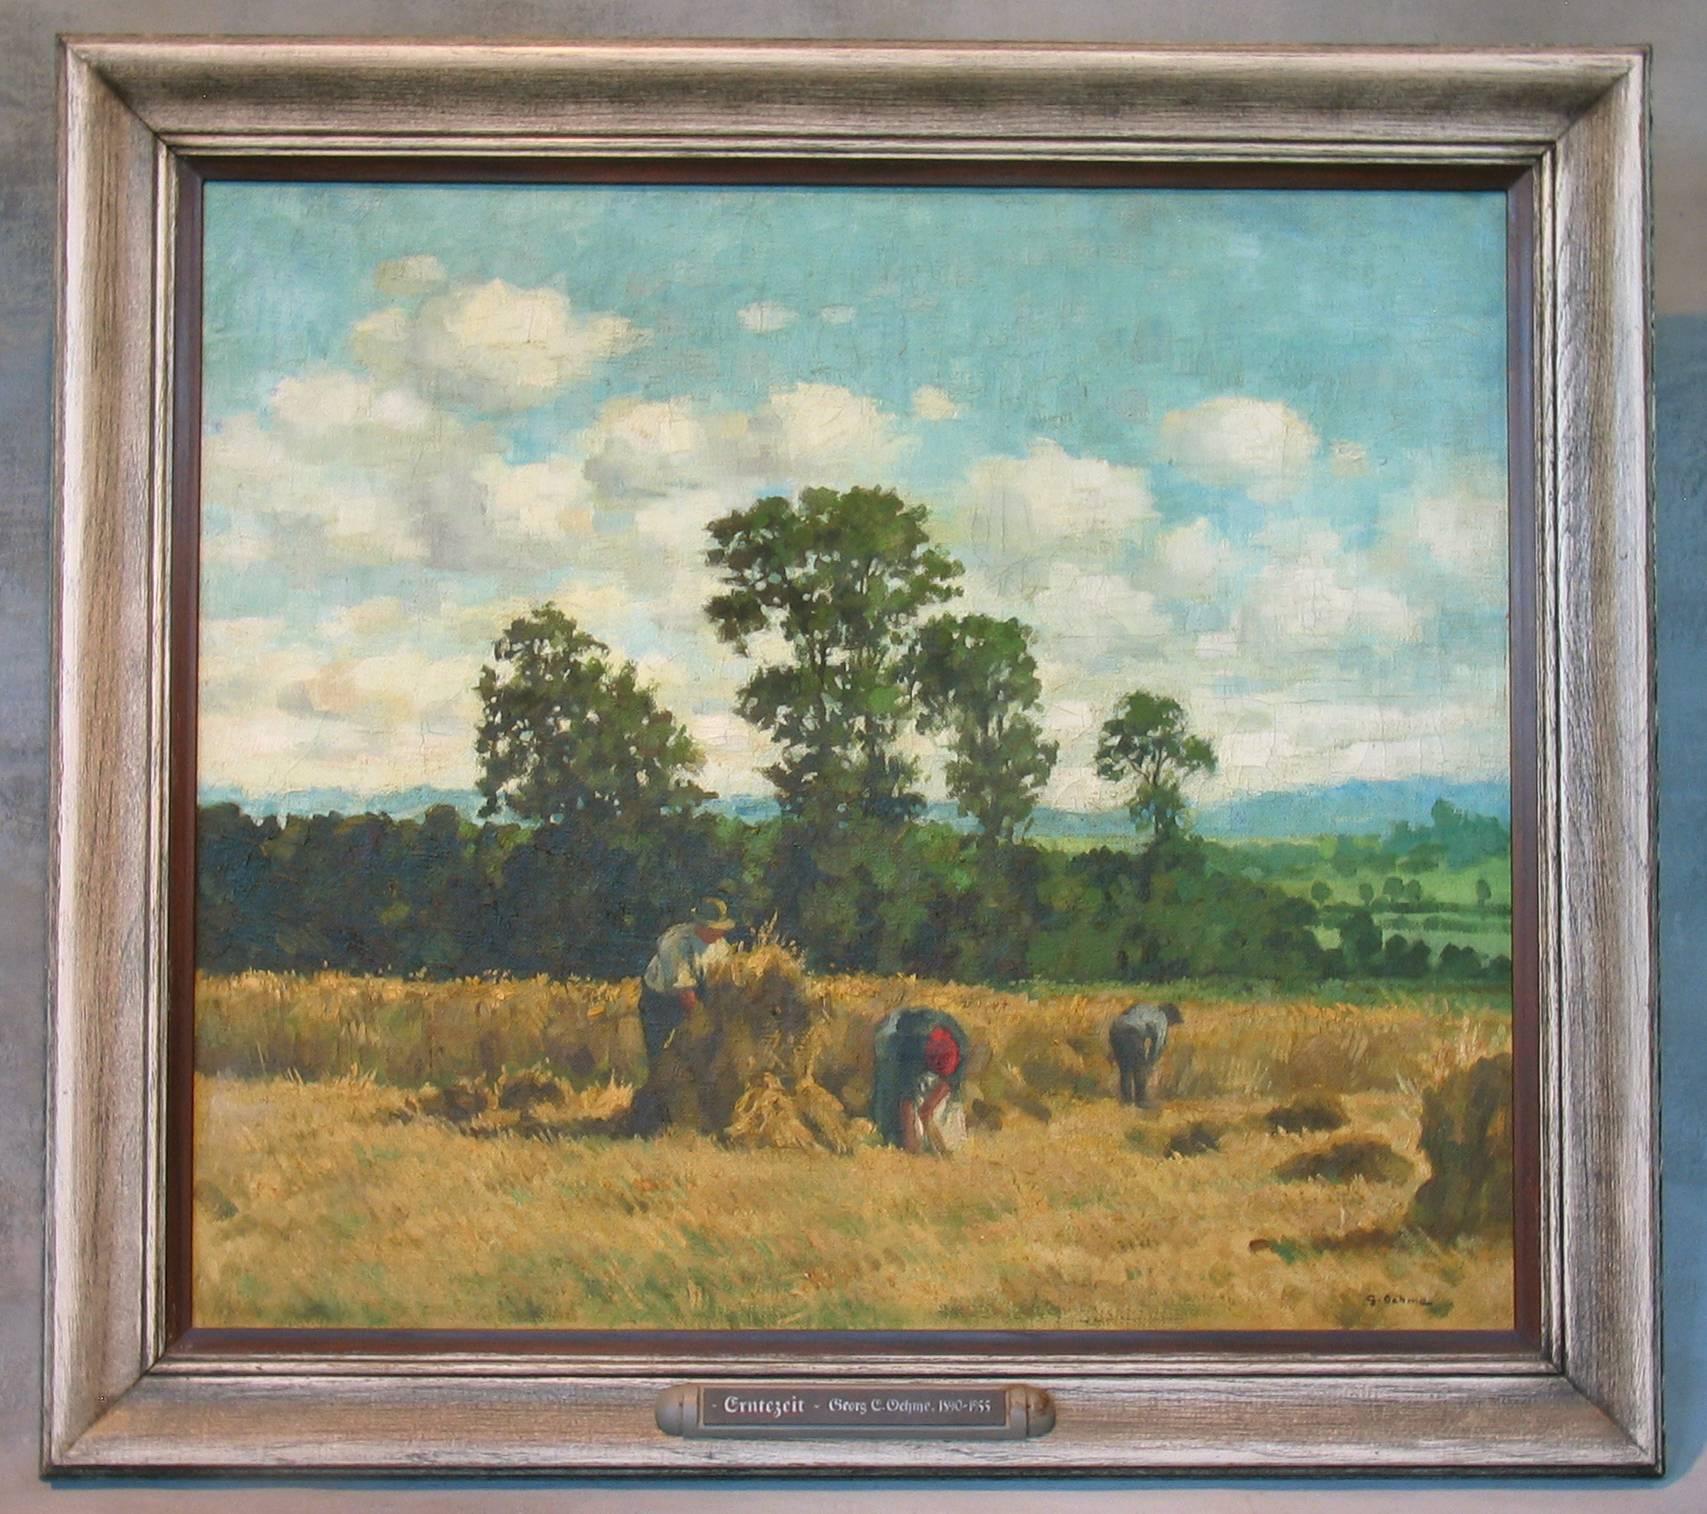 Georg Egmont Oehme (German 1890-1955) Oil on Canvas, Titled Harvest Time, Signed G. Oehme (lower right). Framed and titled on label "Erntezeit Georg E. Oehme 1890-1955" 
Condition: The paint shows light craquelure but is stabile and